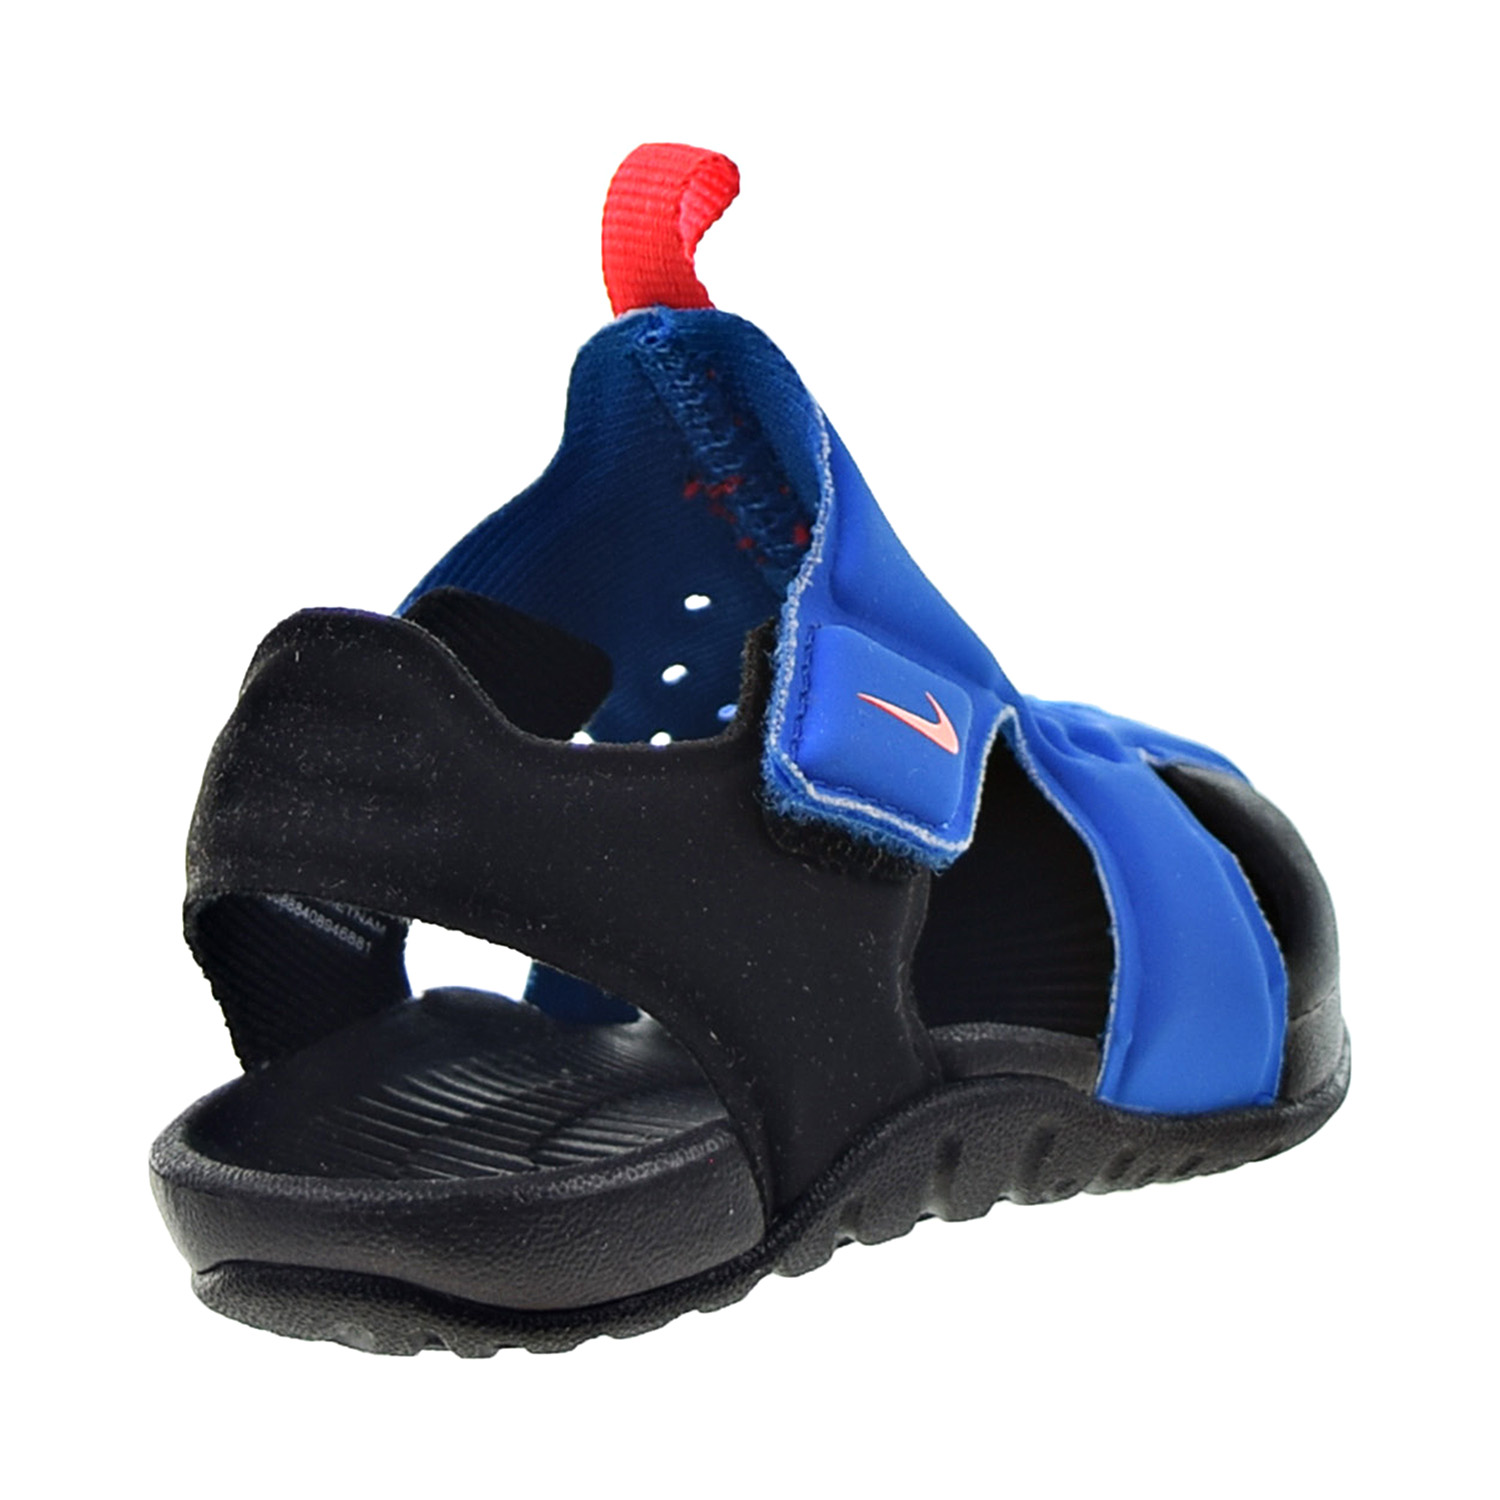 Nike Sunray Protect 2 (TD) Toddlers' Sandals Photo Blue-Bright Crimson 943827-400 - image 3 of 6